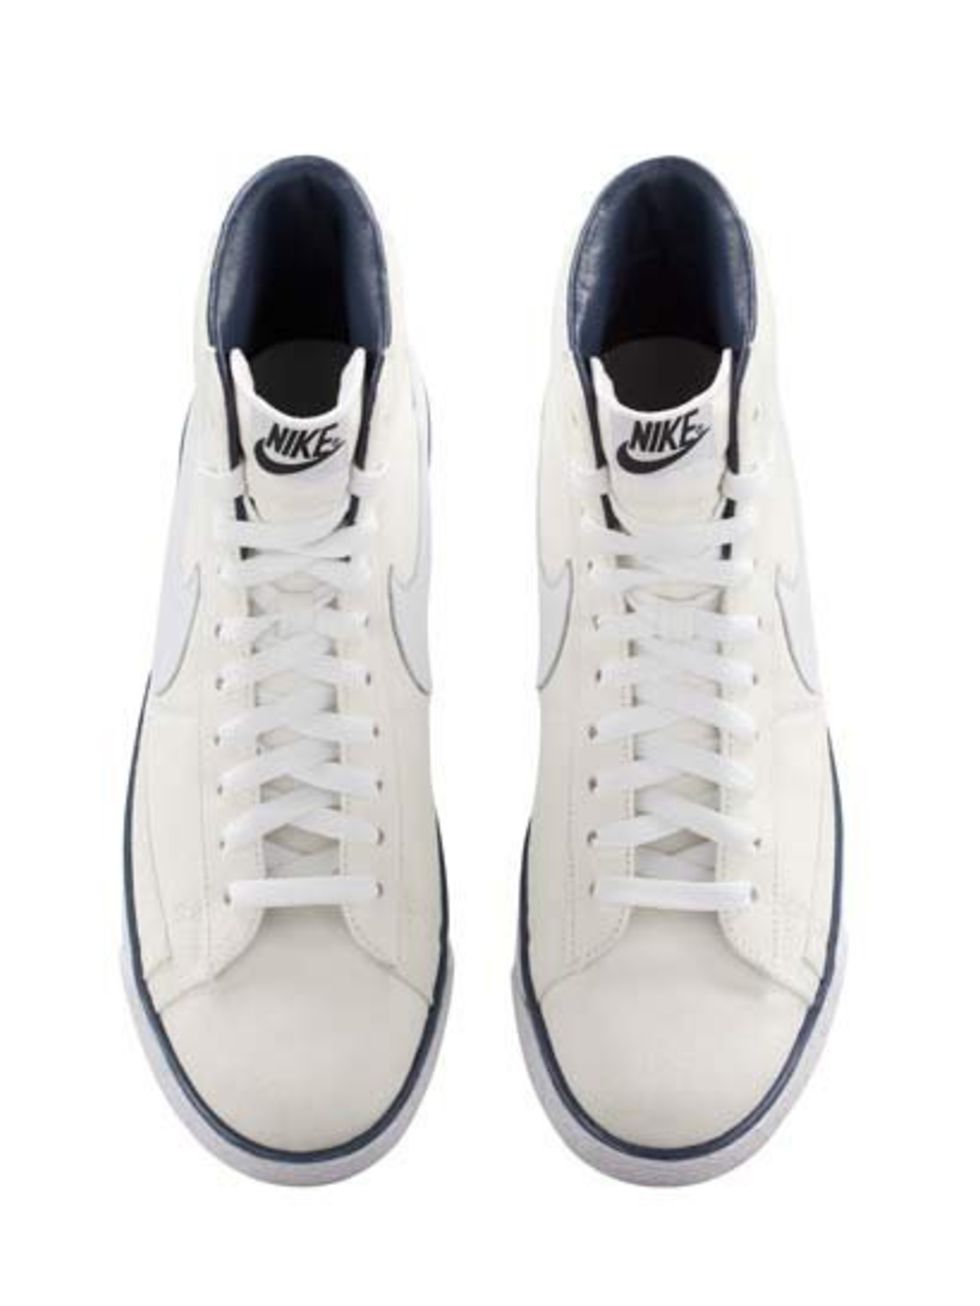 <p>Our latest trainer obsession - out just in time for London Fashion Week.</p><p><a href="http://www.apc.fr/wwuk/women/shoes/blazer-sneakers-woman_pFVAADFA5/colour-white_dBA00003082-BV00306356.html">A.P.C. Nike</a> trainers, £95</p>